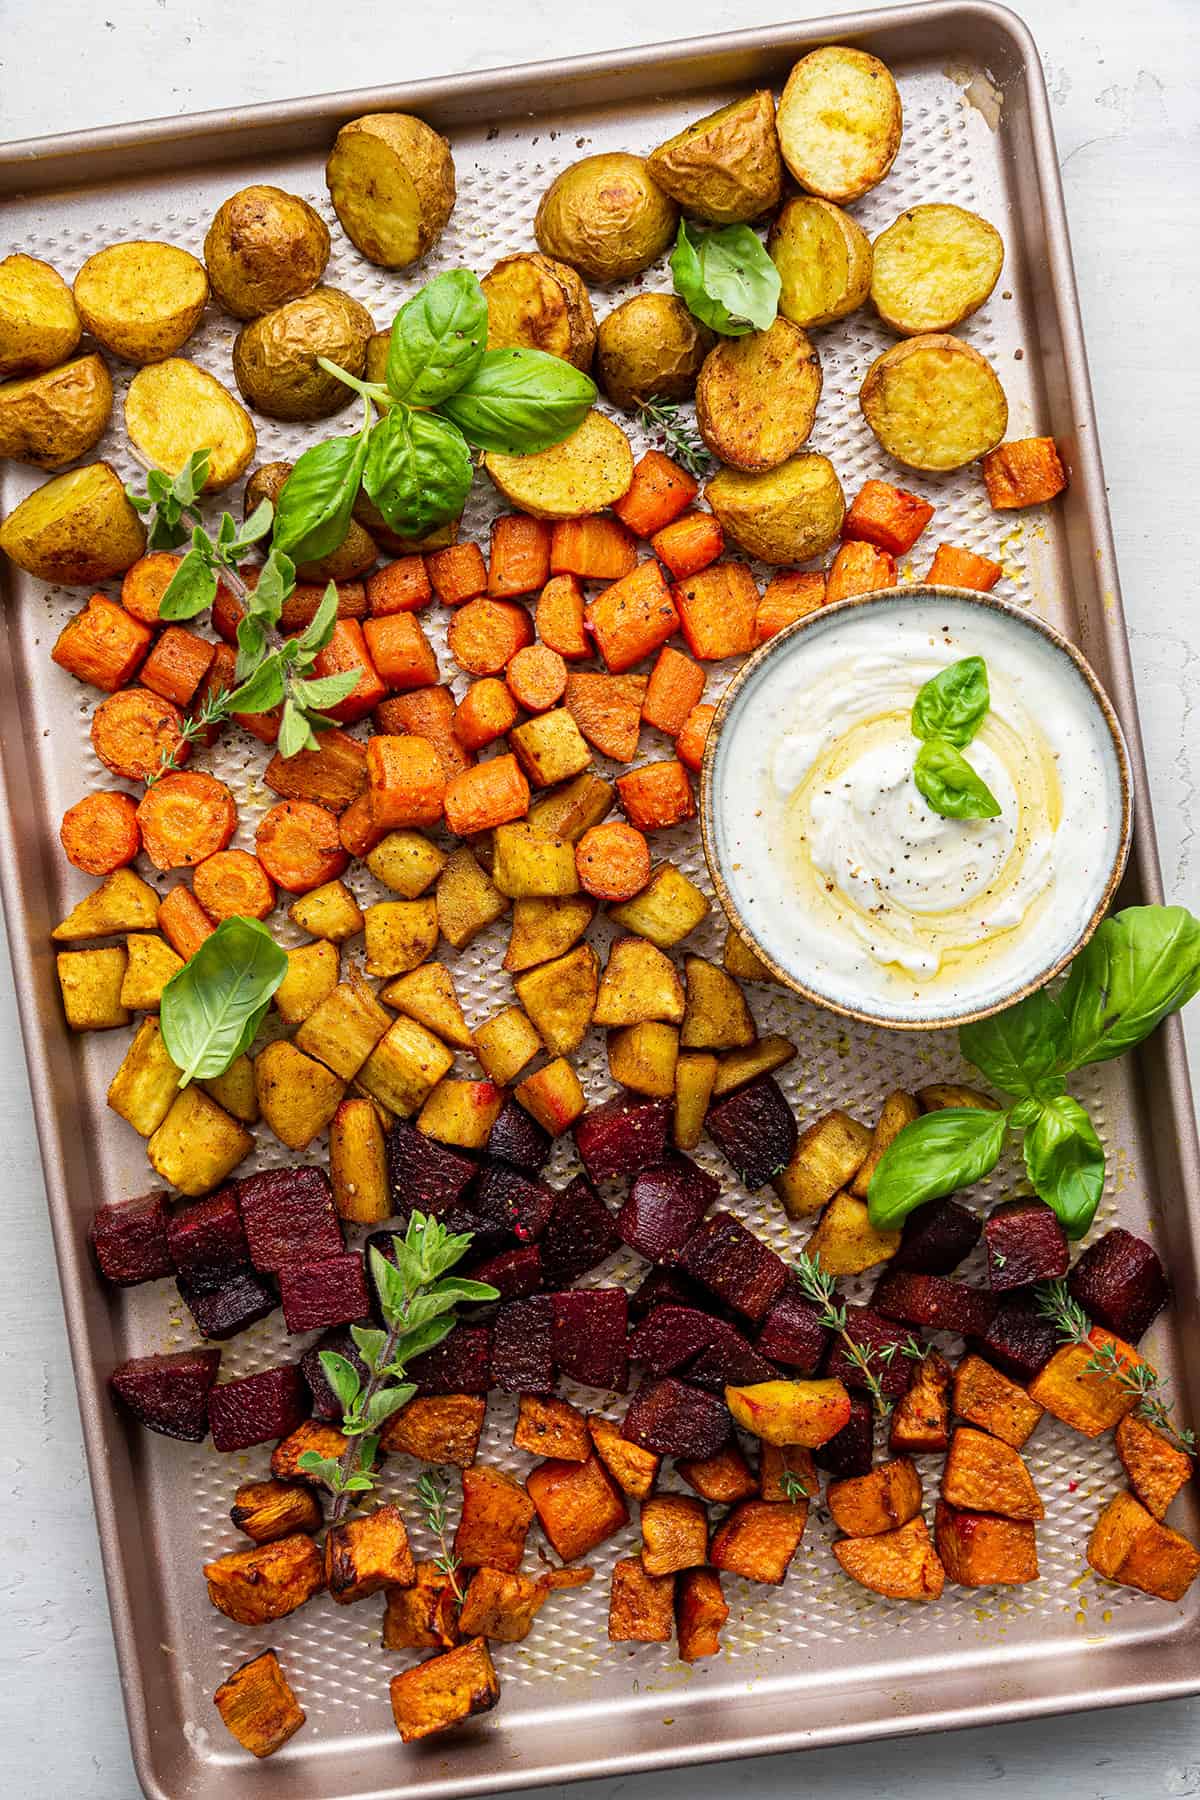 Overhead view of oven-roasted root vegetables on baking dish with fresh herbs and bowl of yogurt dip